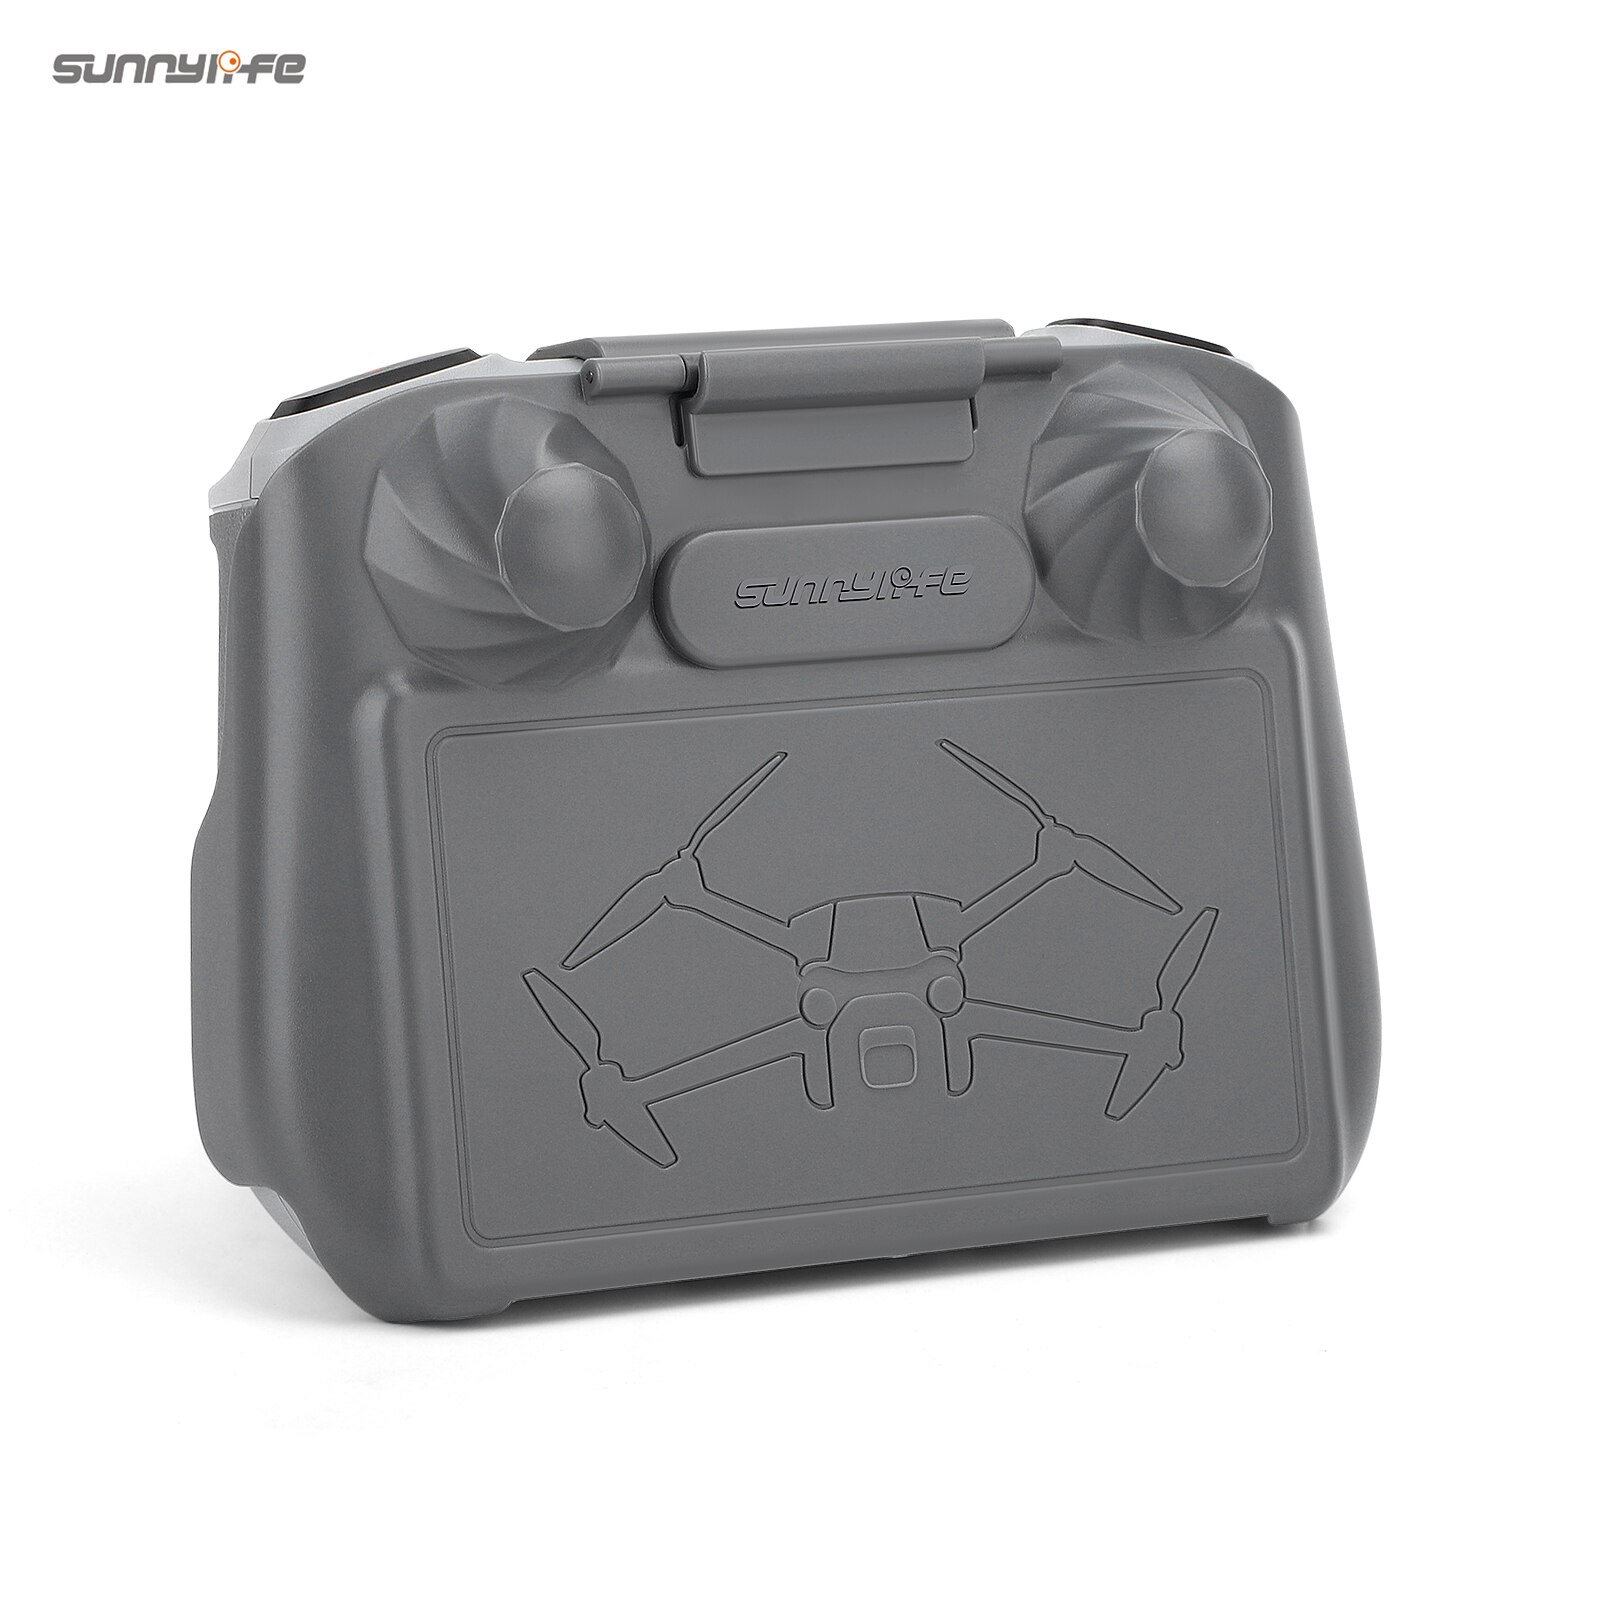 https://dronedepot.co.nz/wp-content/uploads/2022/10/Sunnylife-2-in-1-Controller-Protector-Sun-Hood-Control-Sticks-Guard-Screen-Monitor-Cover-for-DJI2.jpeg